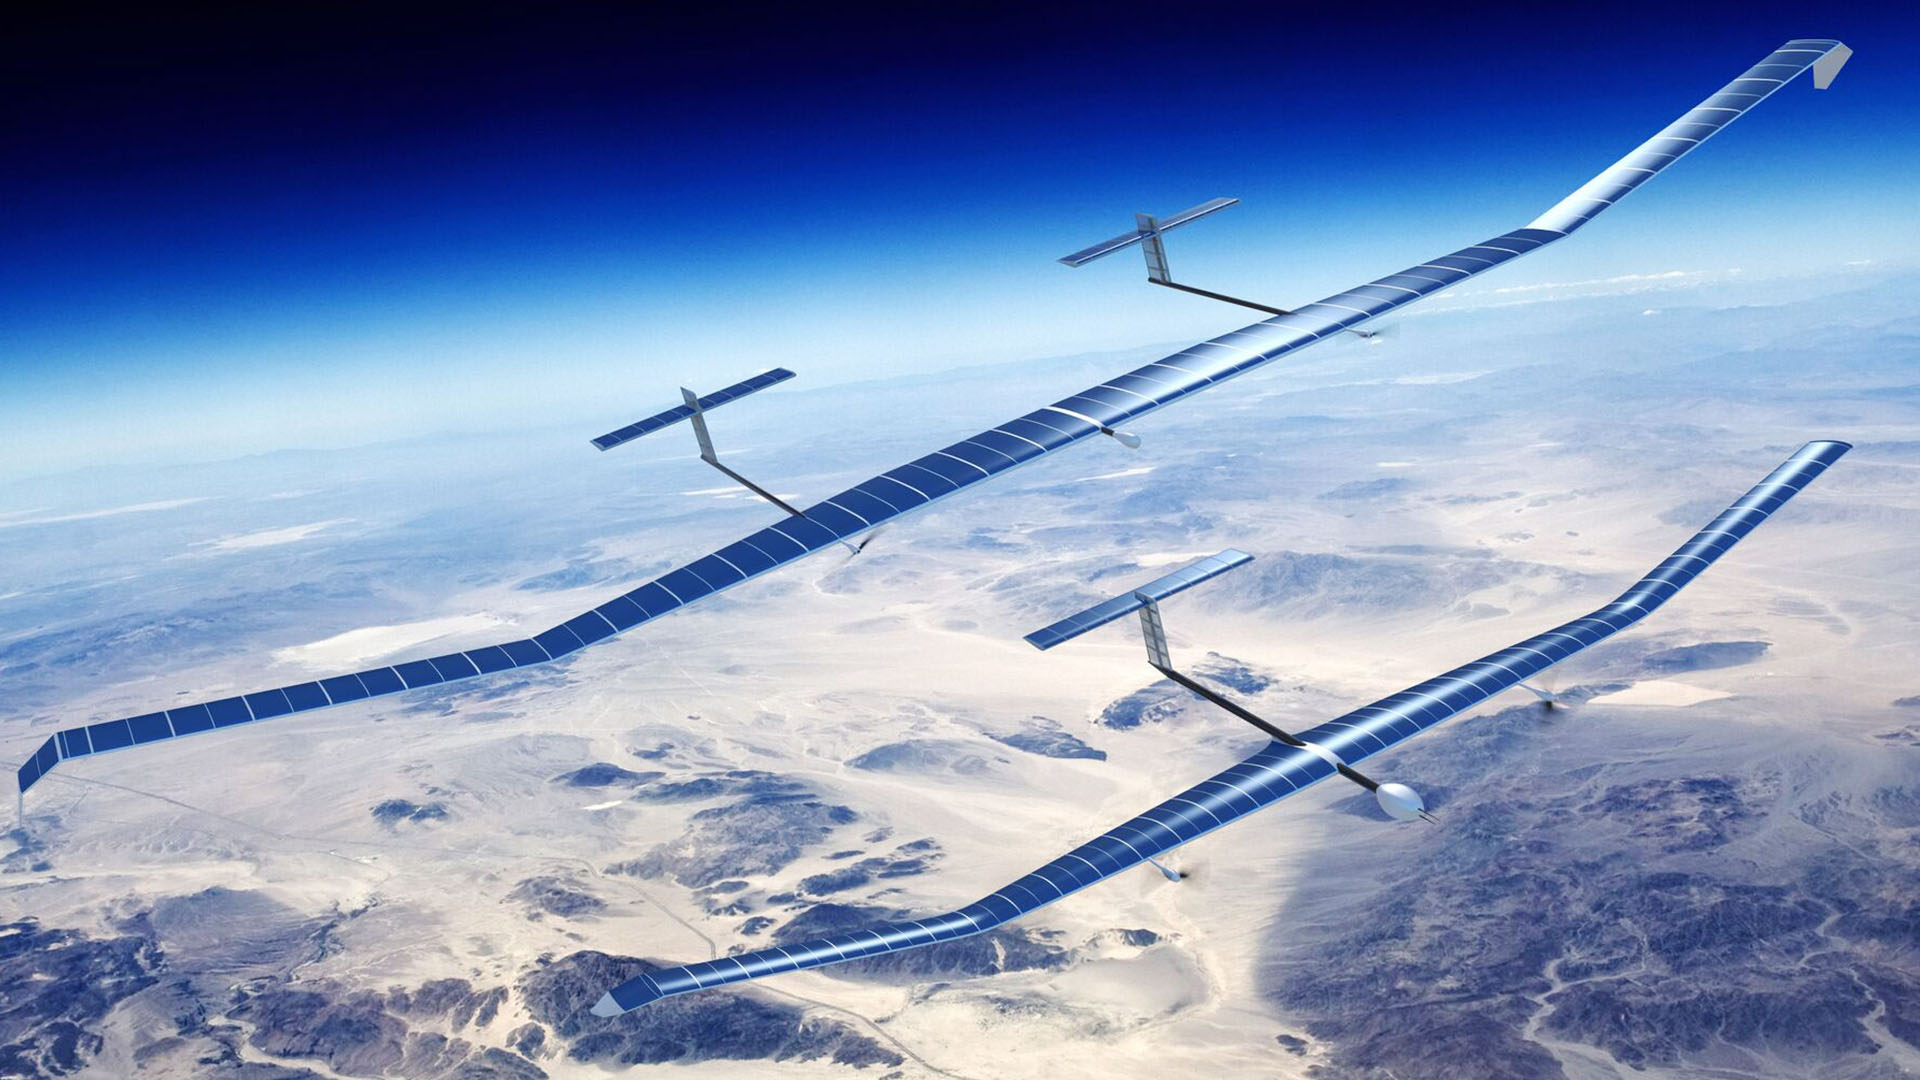 Airbus' Zephyr high altitude drone can fly for 14 days without landing